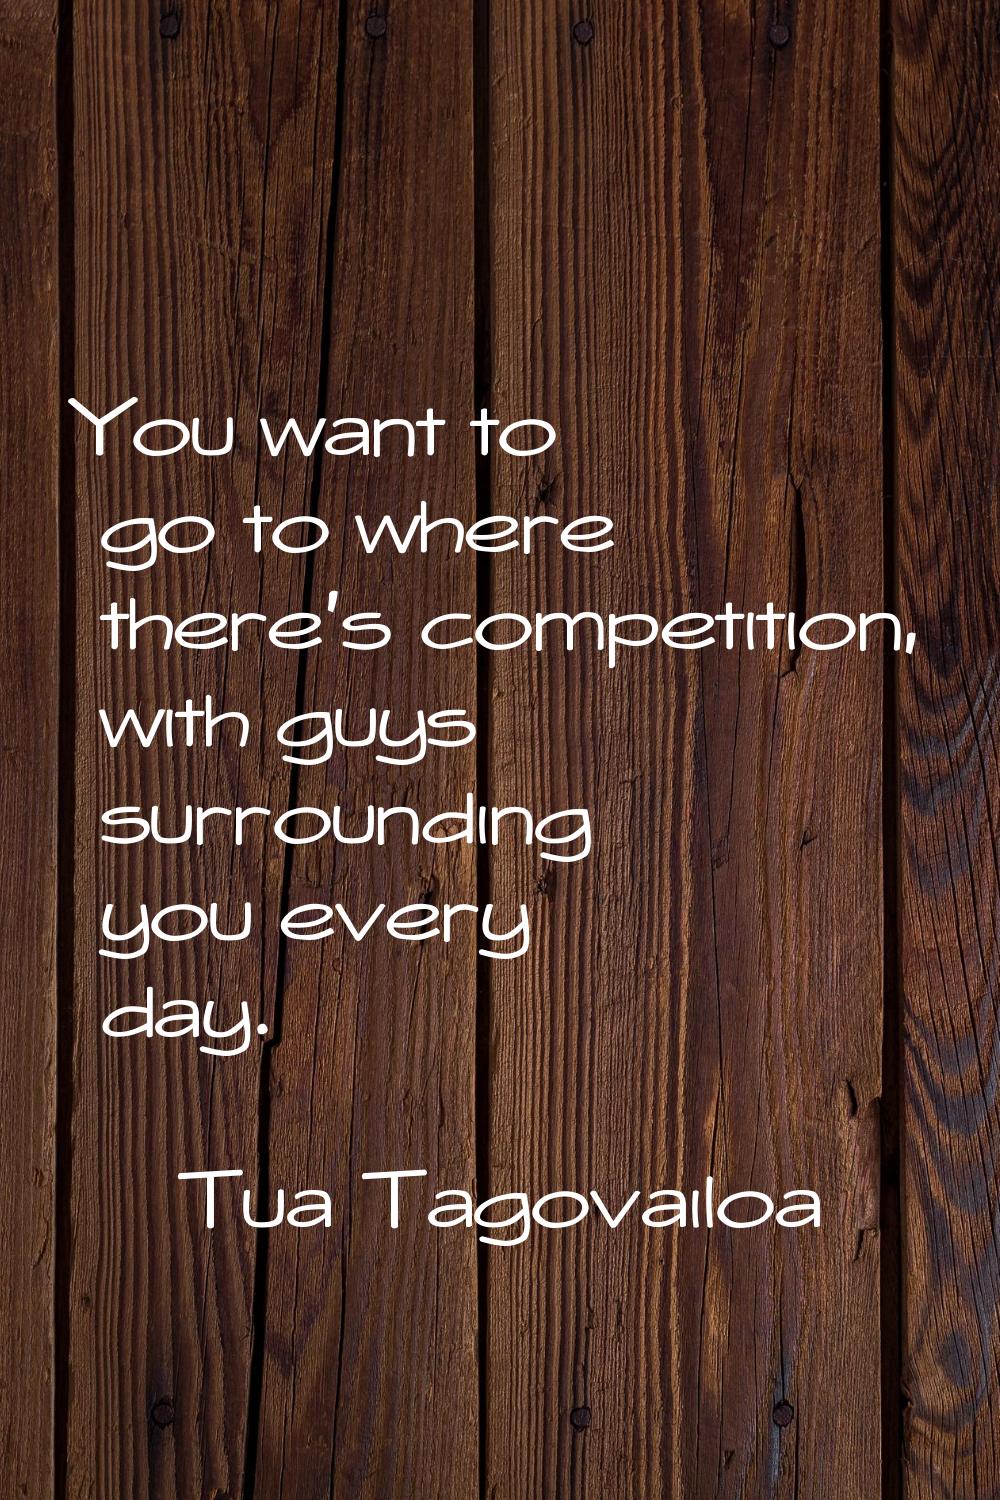 You want to go to where there's competition, with guys surrounding you every day.